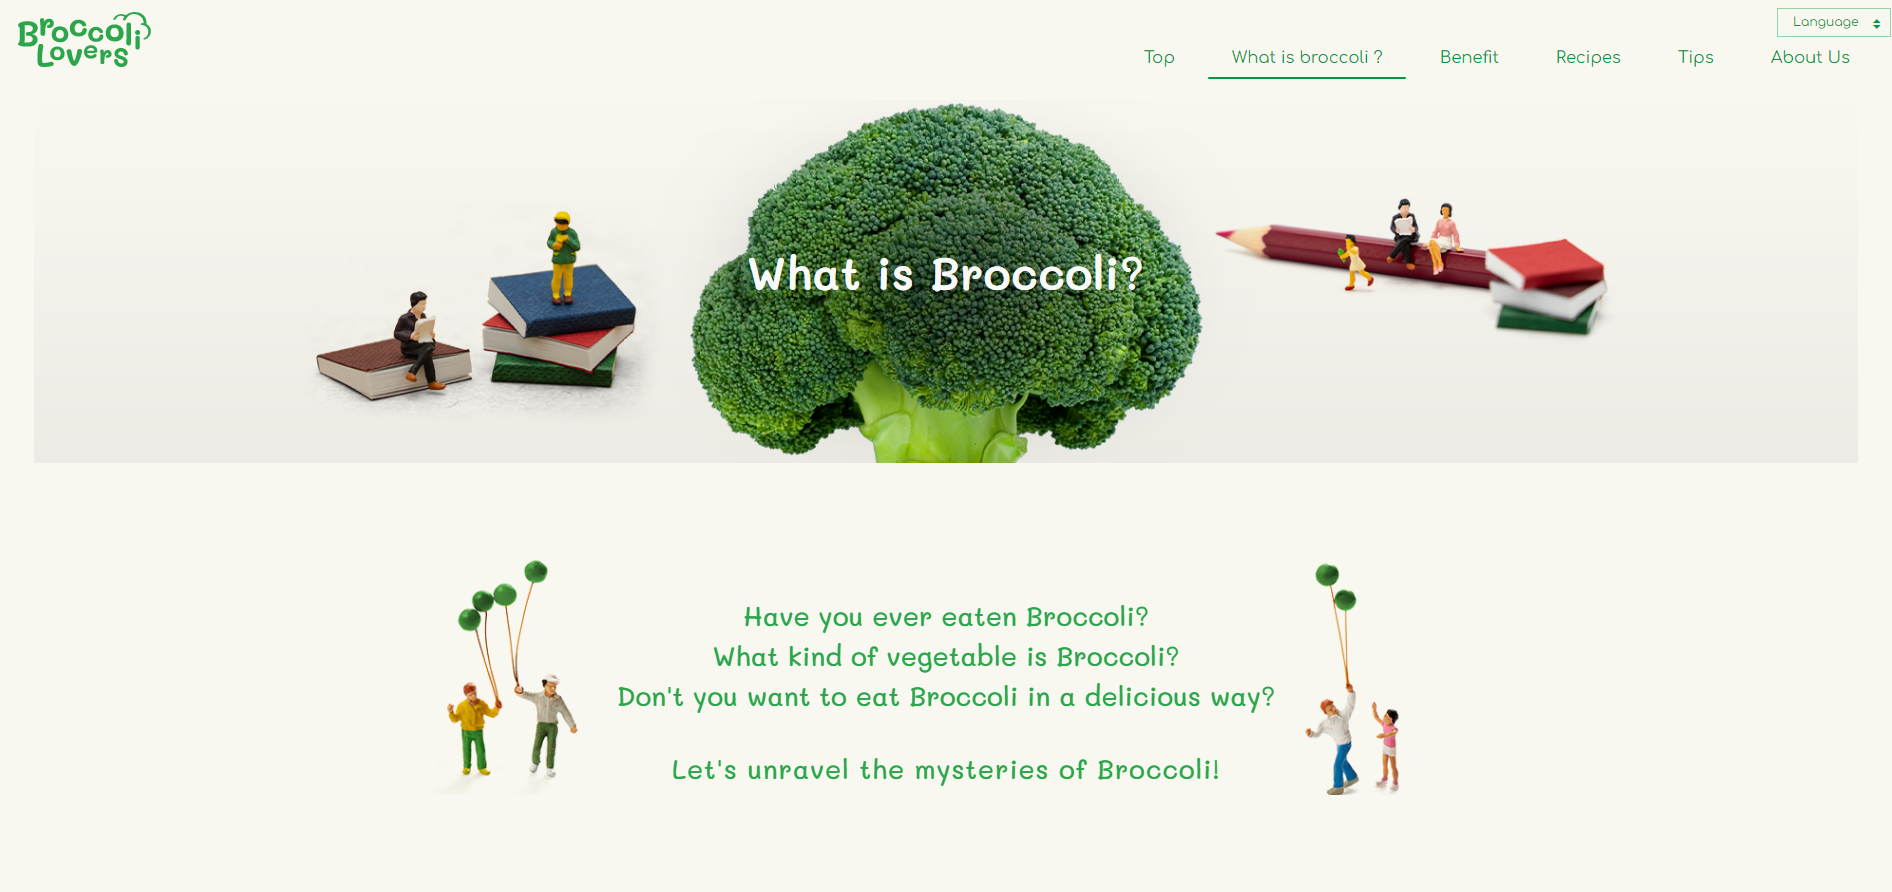 What is Broccoli?